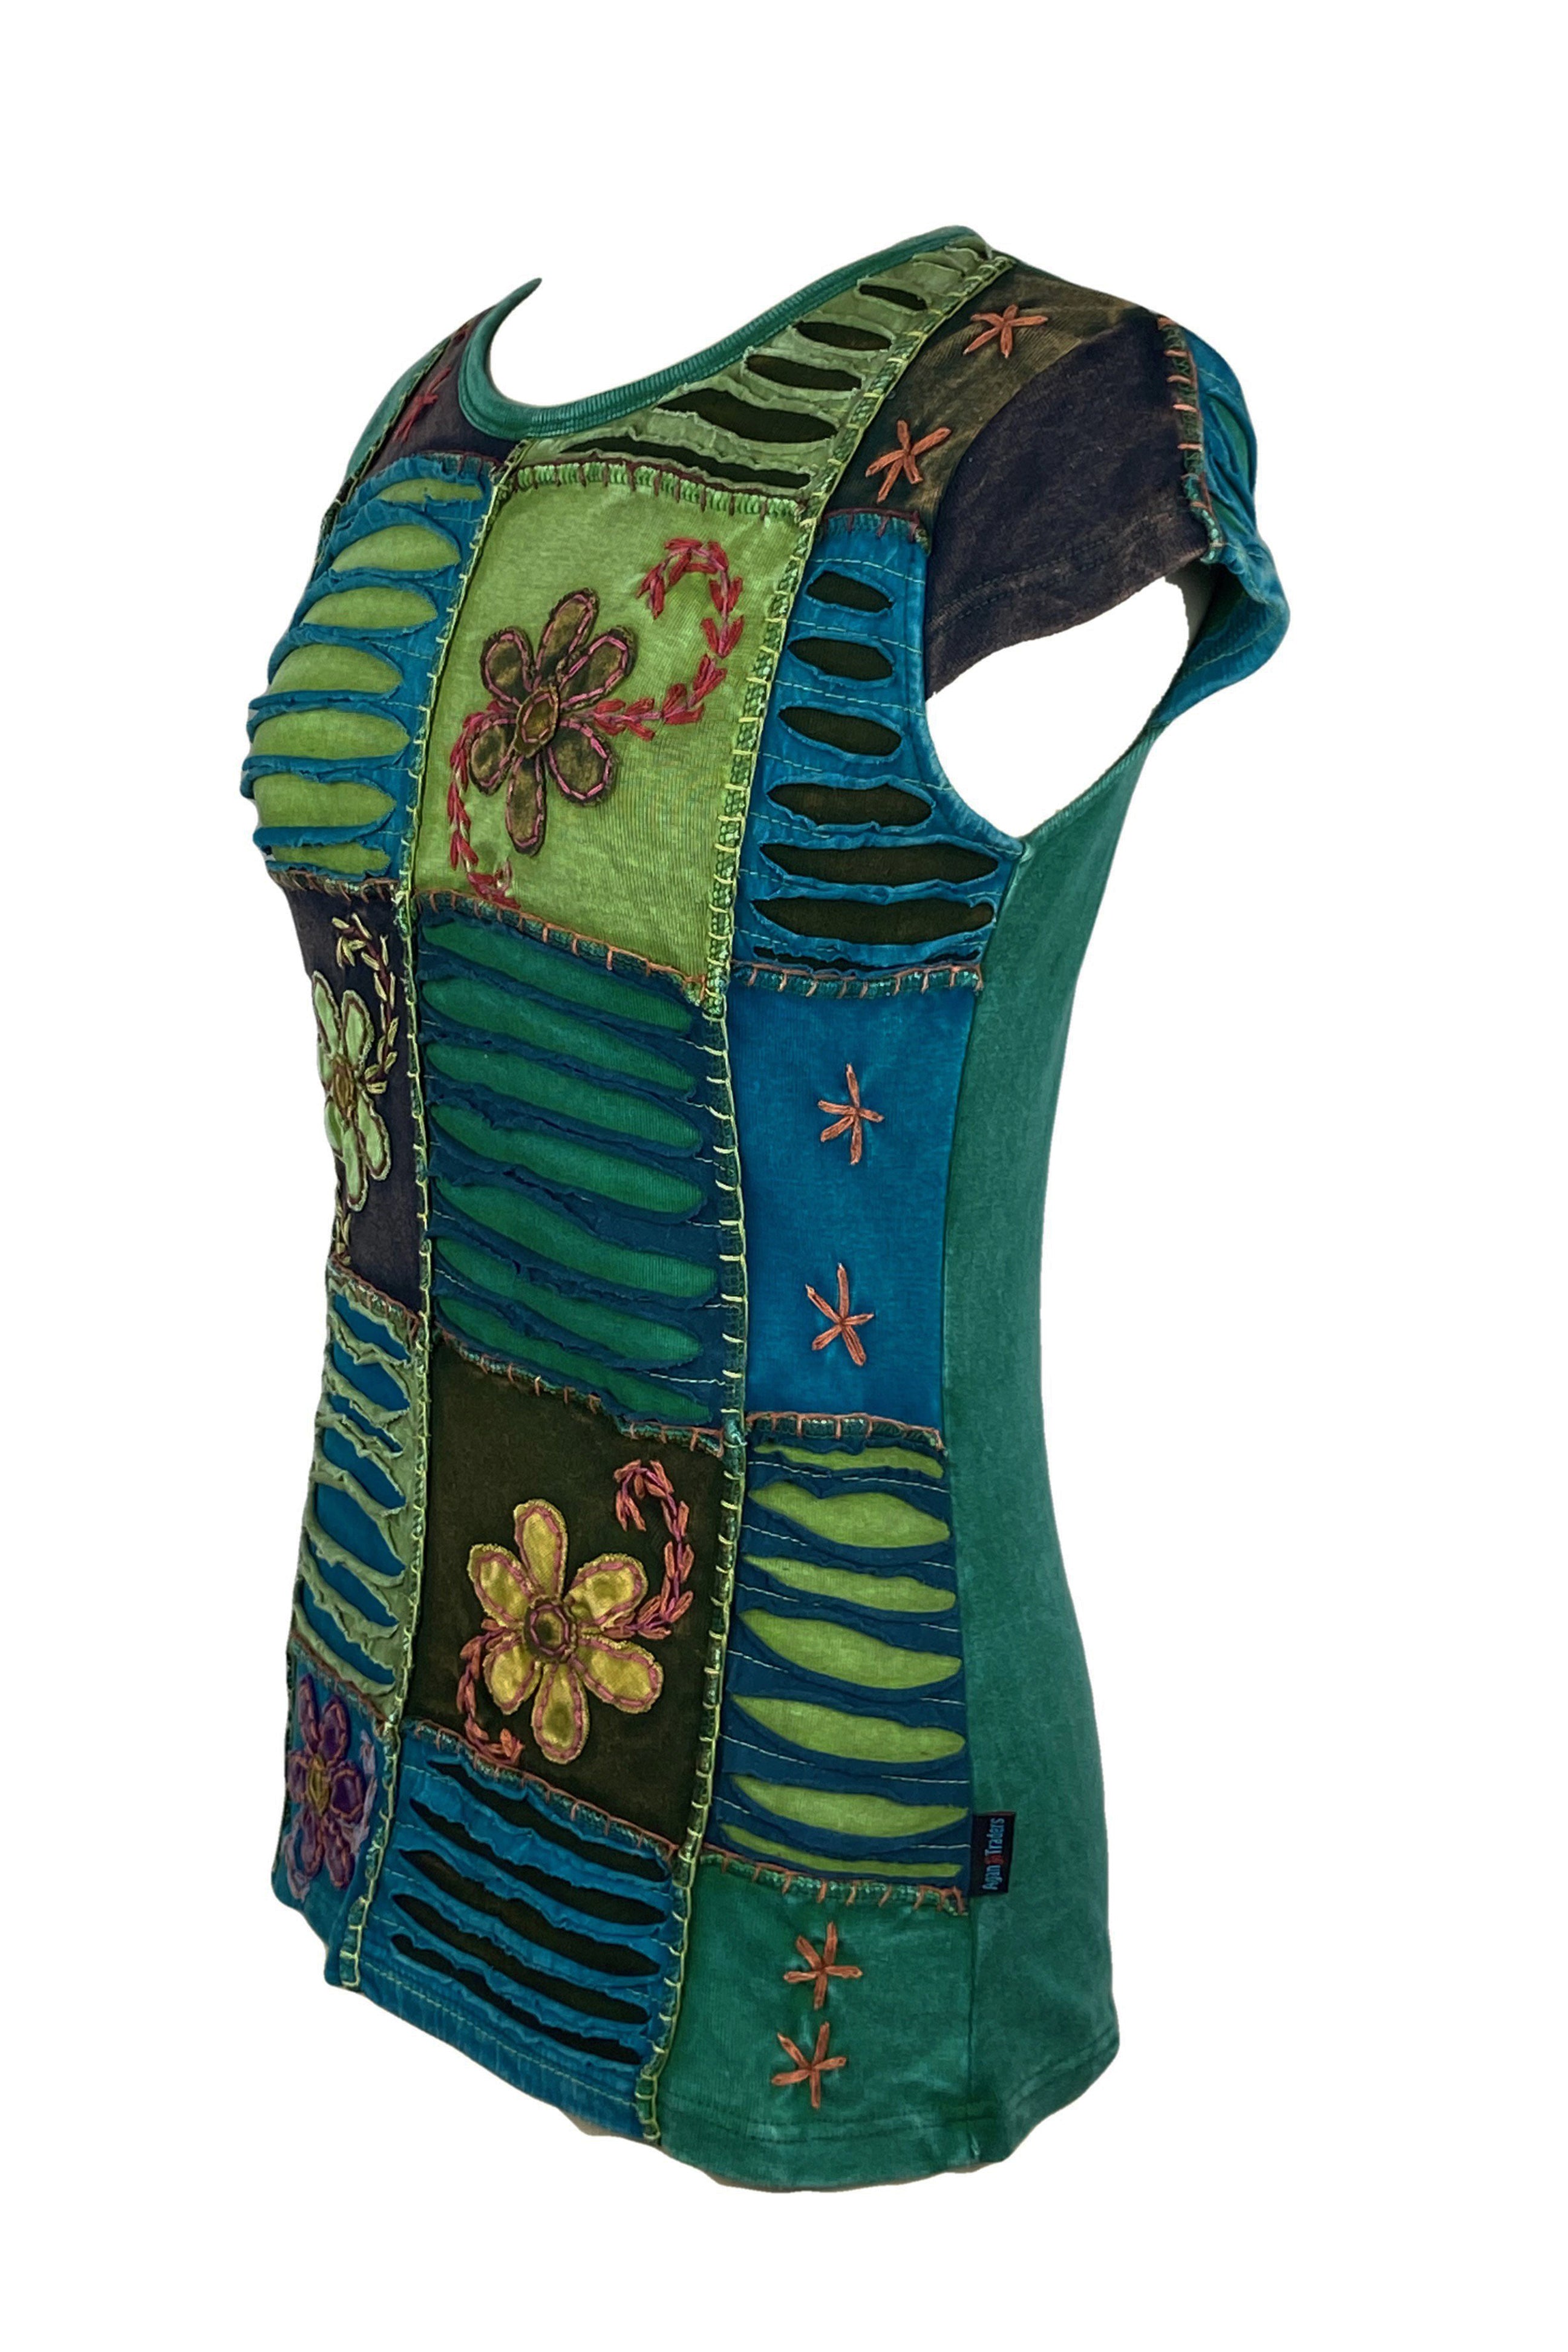 Multicolored Floral Embroidery Stonewashed Cotton Tank Top, Tunic-Shirt, Multicoloured